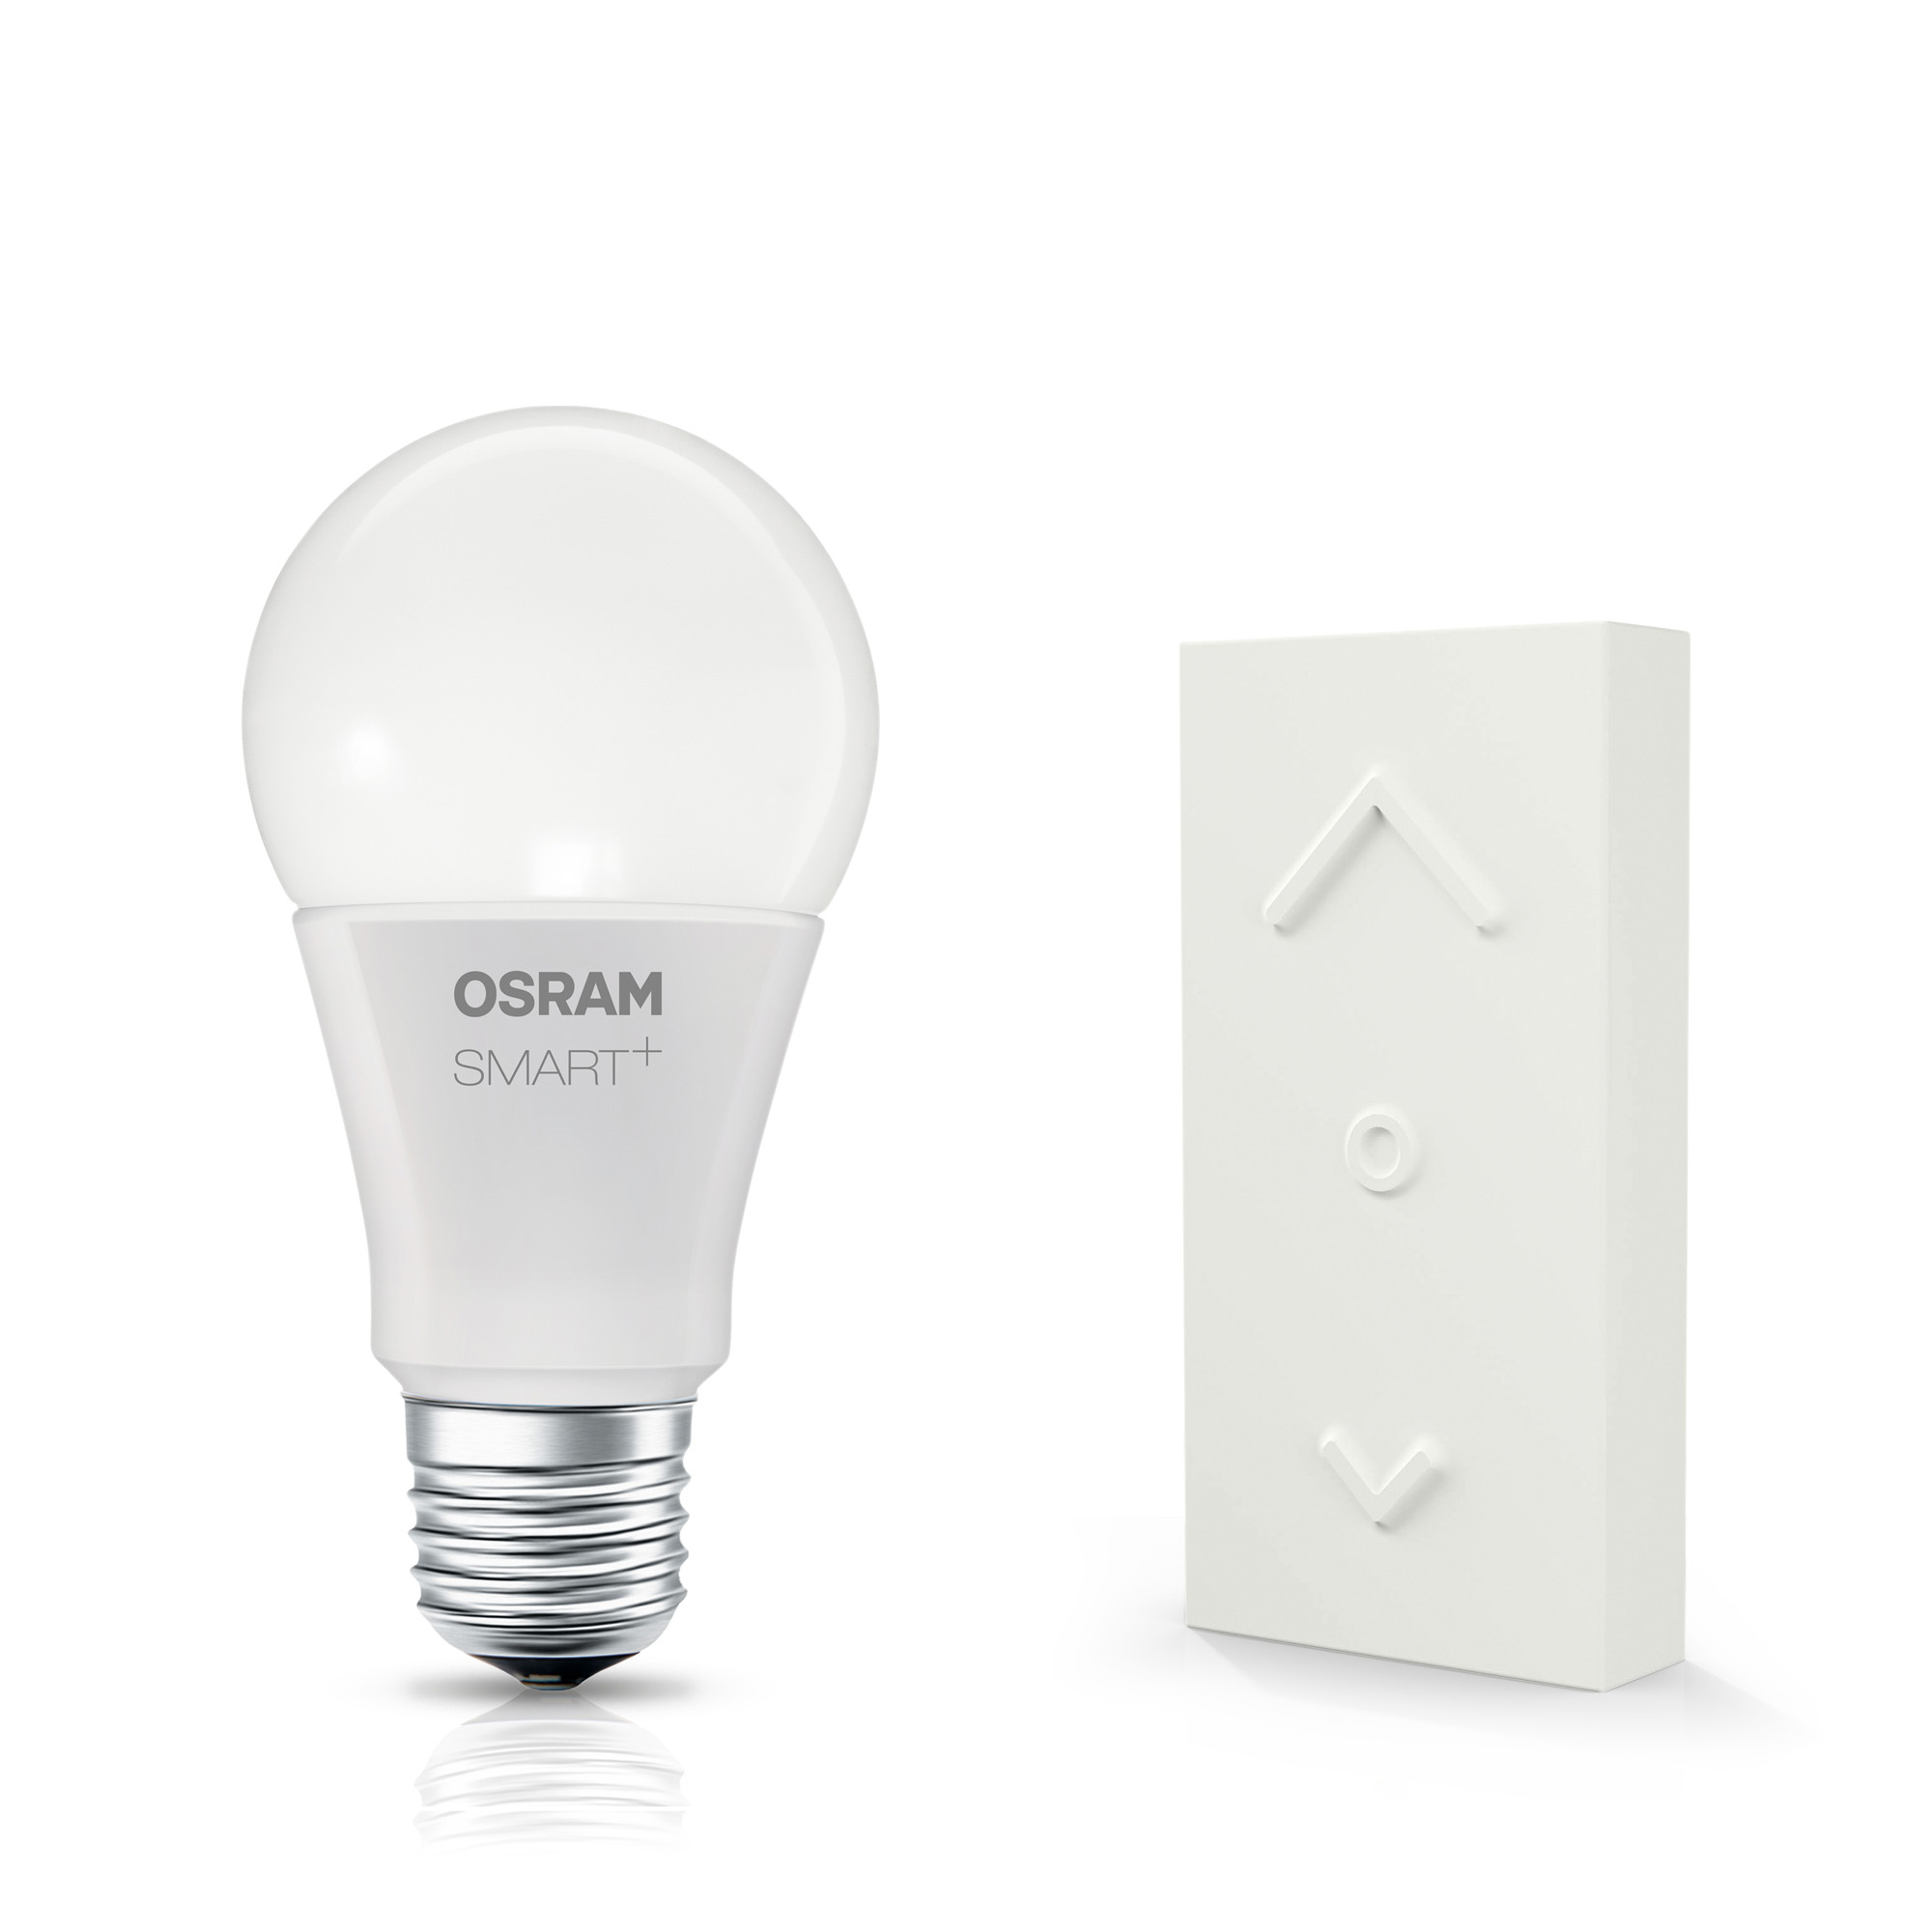 Osram Smart+ Color Switch Mini Kit, E27 RGBW + Dimming Switch 2200-6500K 600lm